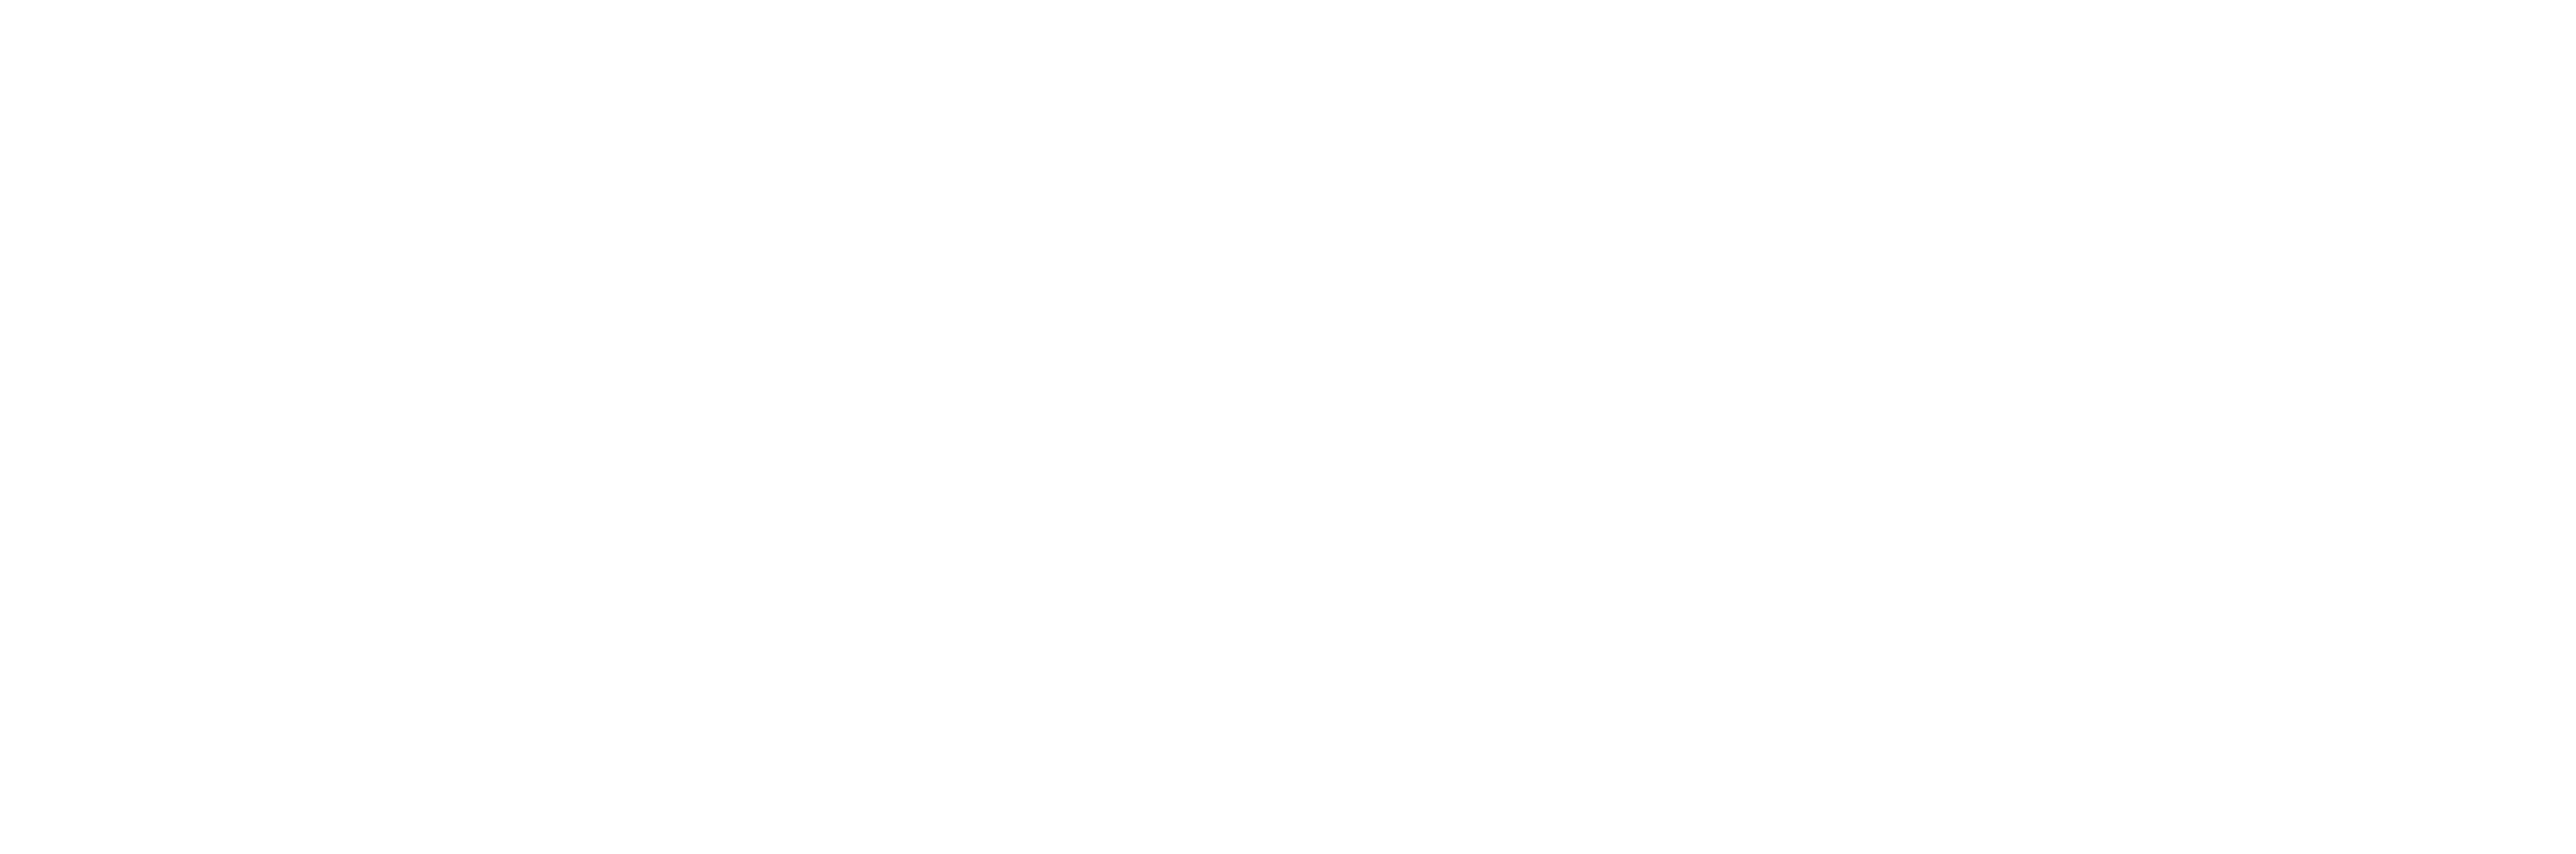 Campus Nyköping - Moodle